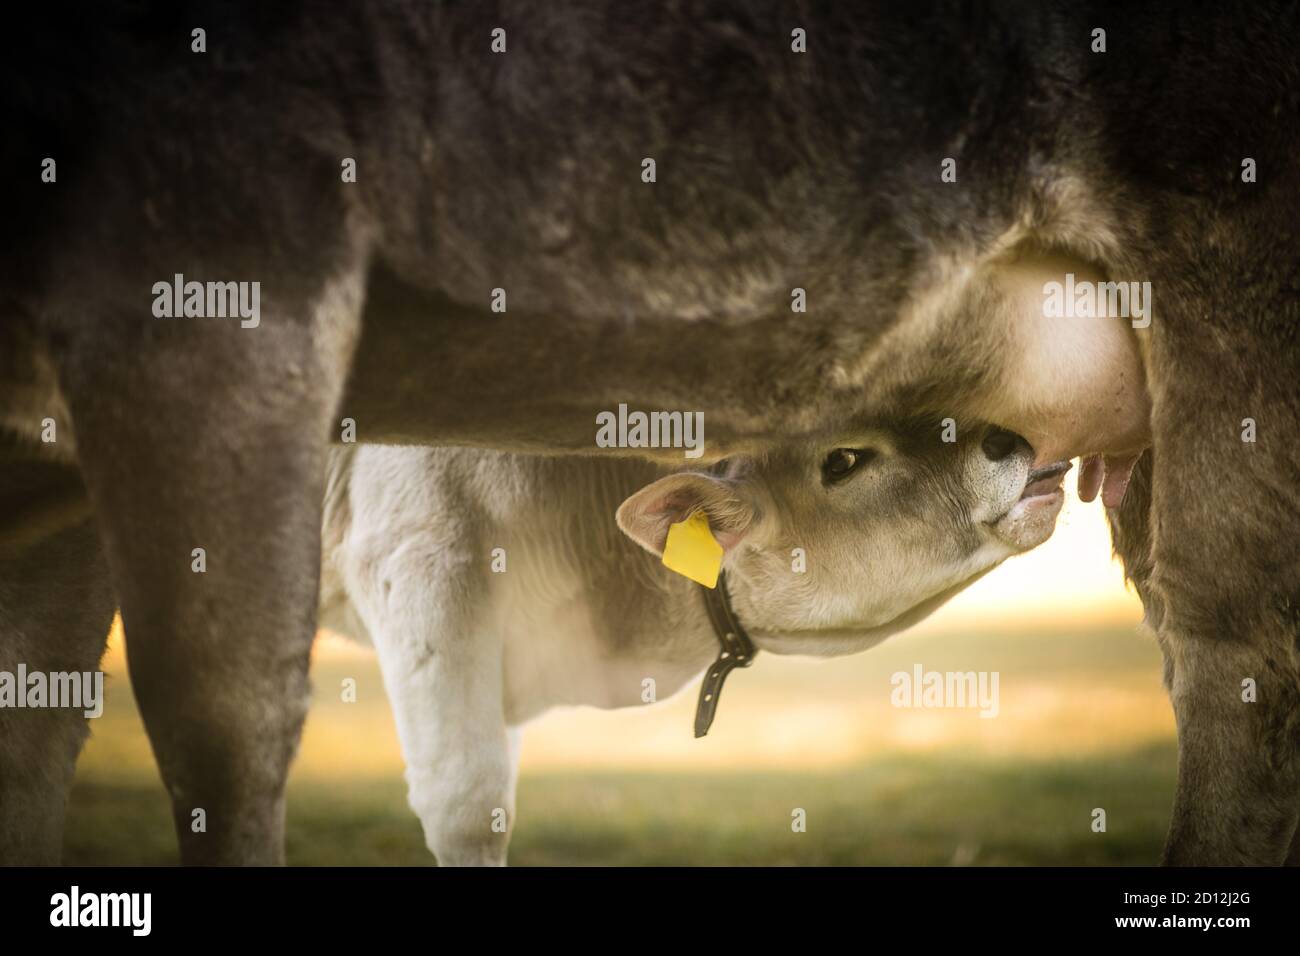 Cute calf drinks milk from its mother's udder Stock Photo